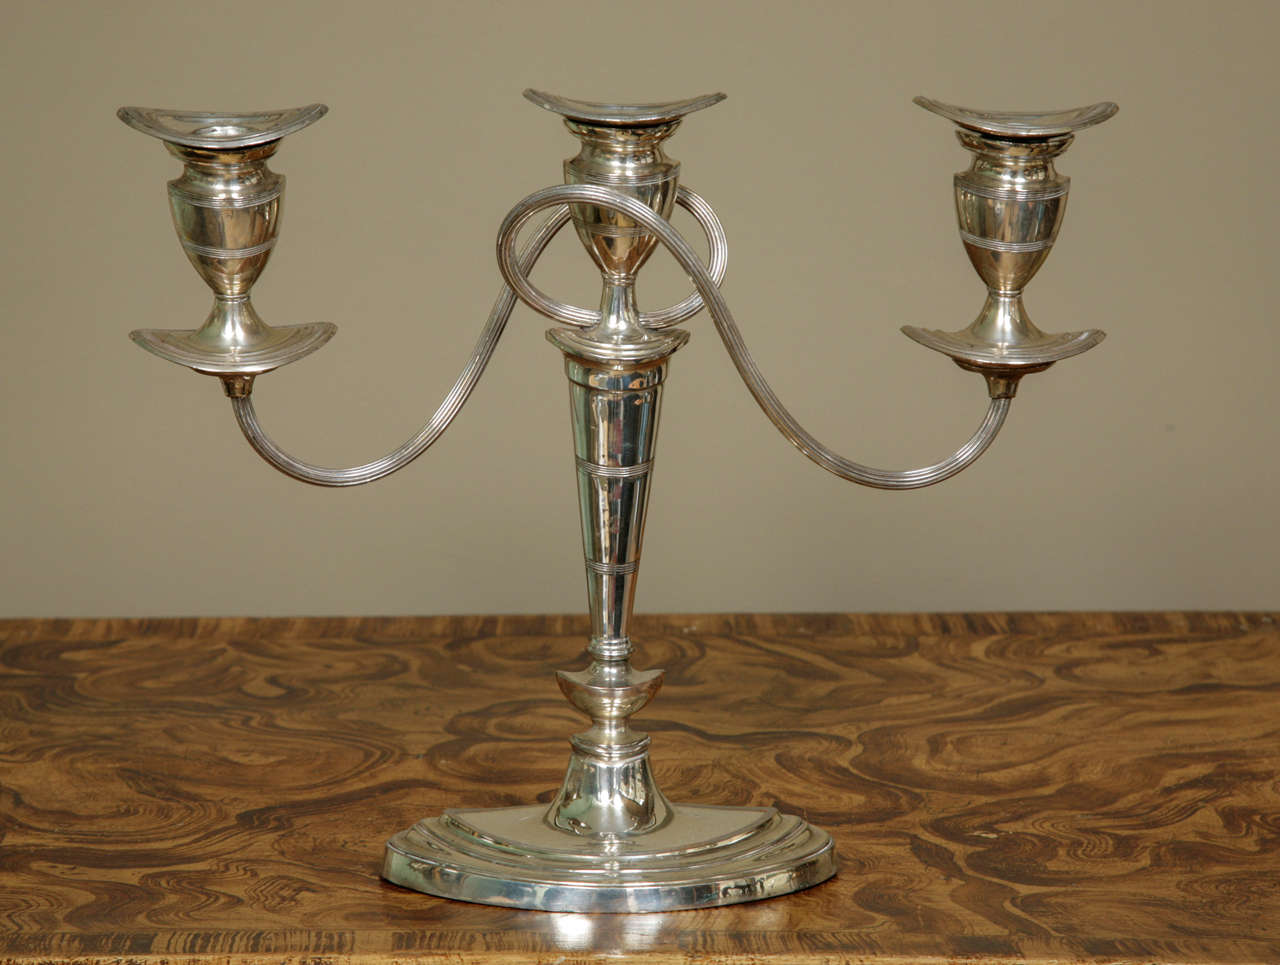 A stylish pair of Georgian Sheffield silver plated triple candle pair of candelabra in a very elegant Neoclassical style. The urn-shaped finials have removable drip pans  and are supported by ridged double swirl arms. This pair date from ca. 1790.